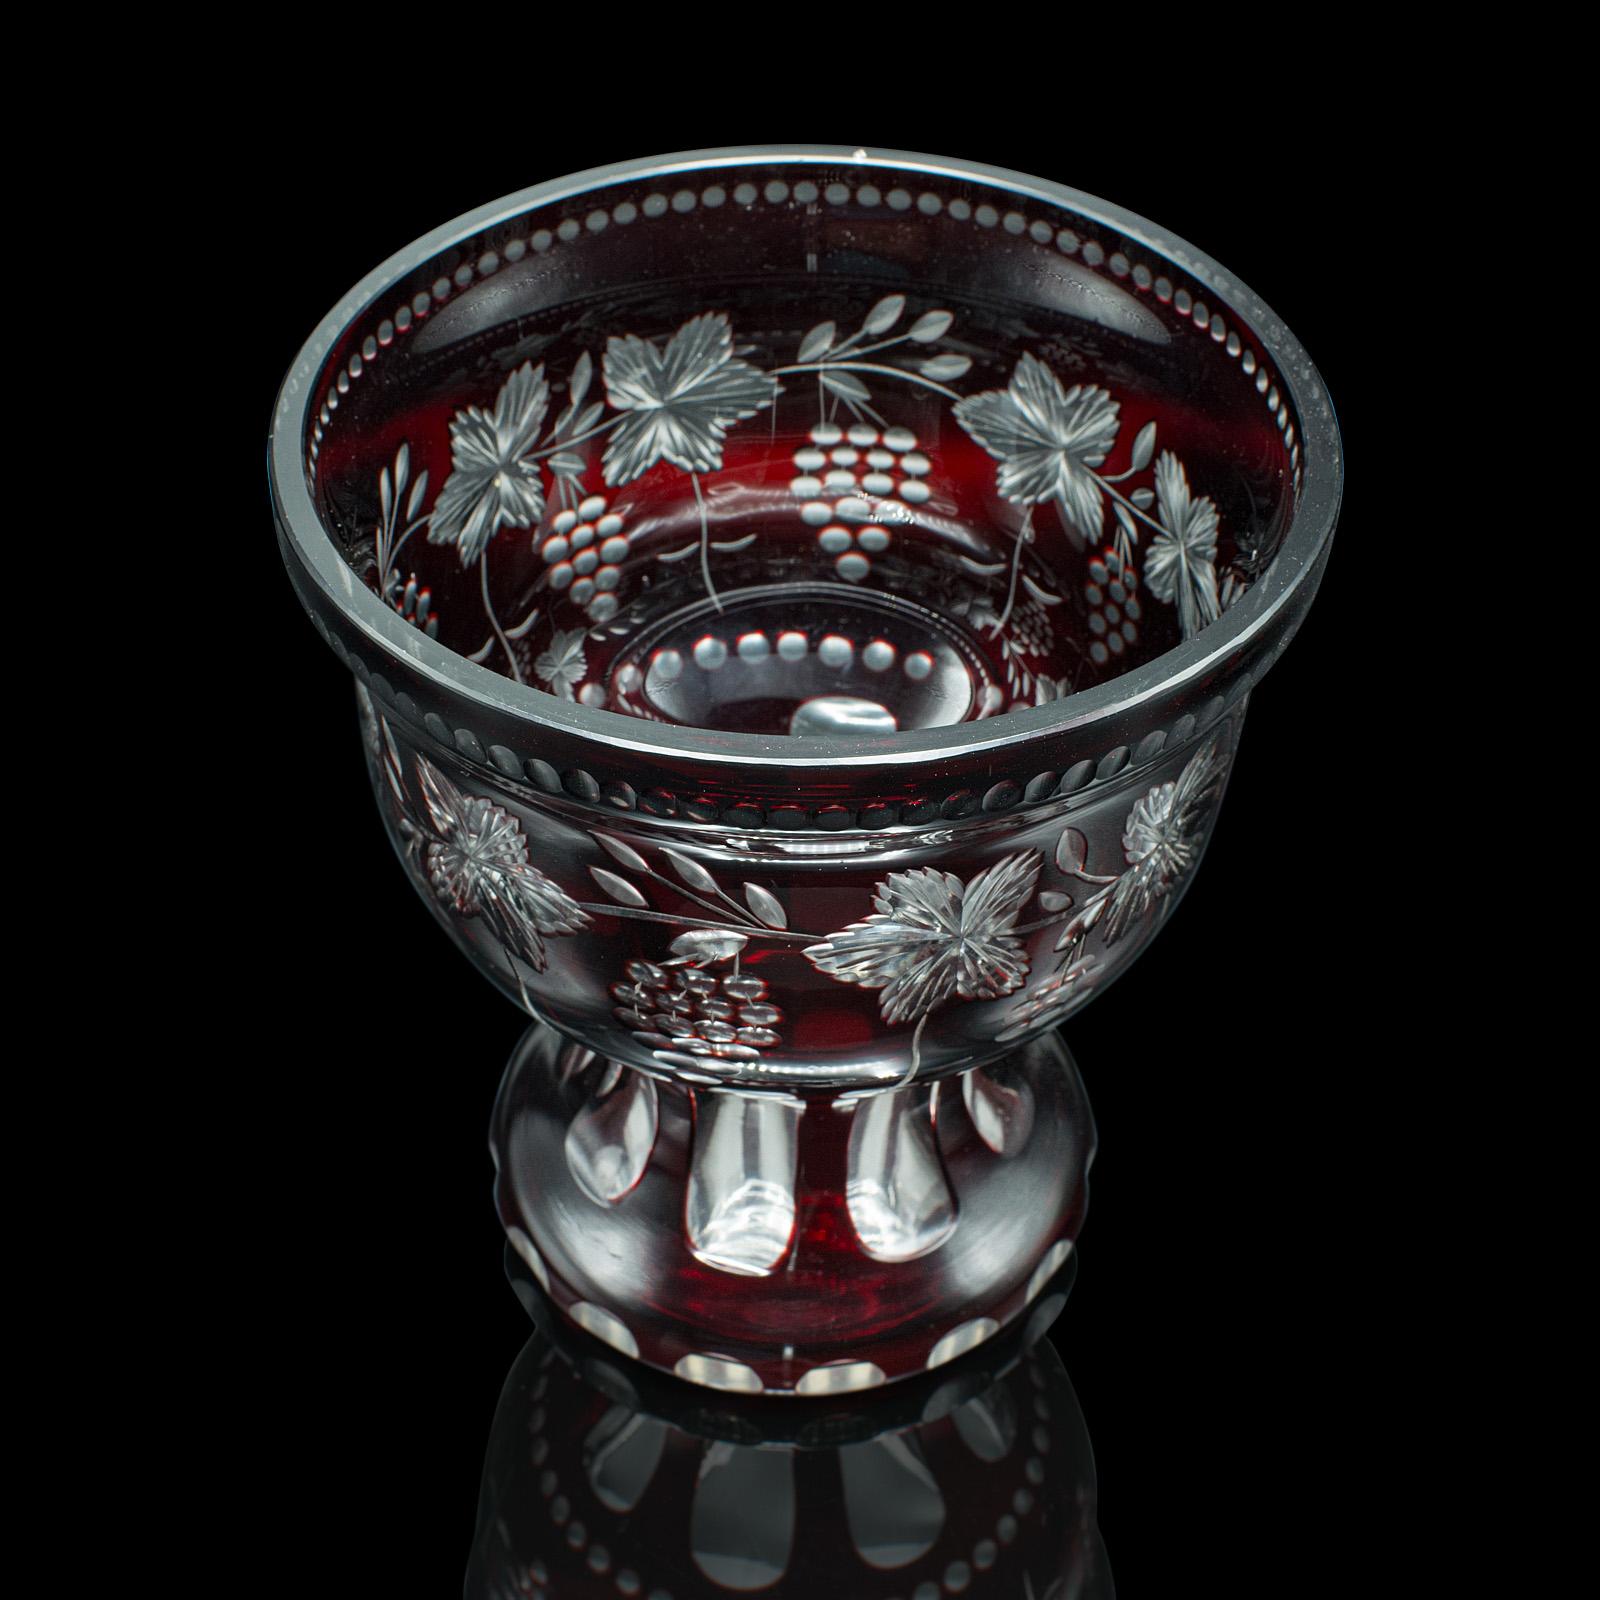 20th Century Antique Ruby Pedestal Bowl, Continental, Glass, Decorative Ice Bucket, C.1920 For Sale